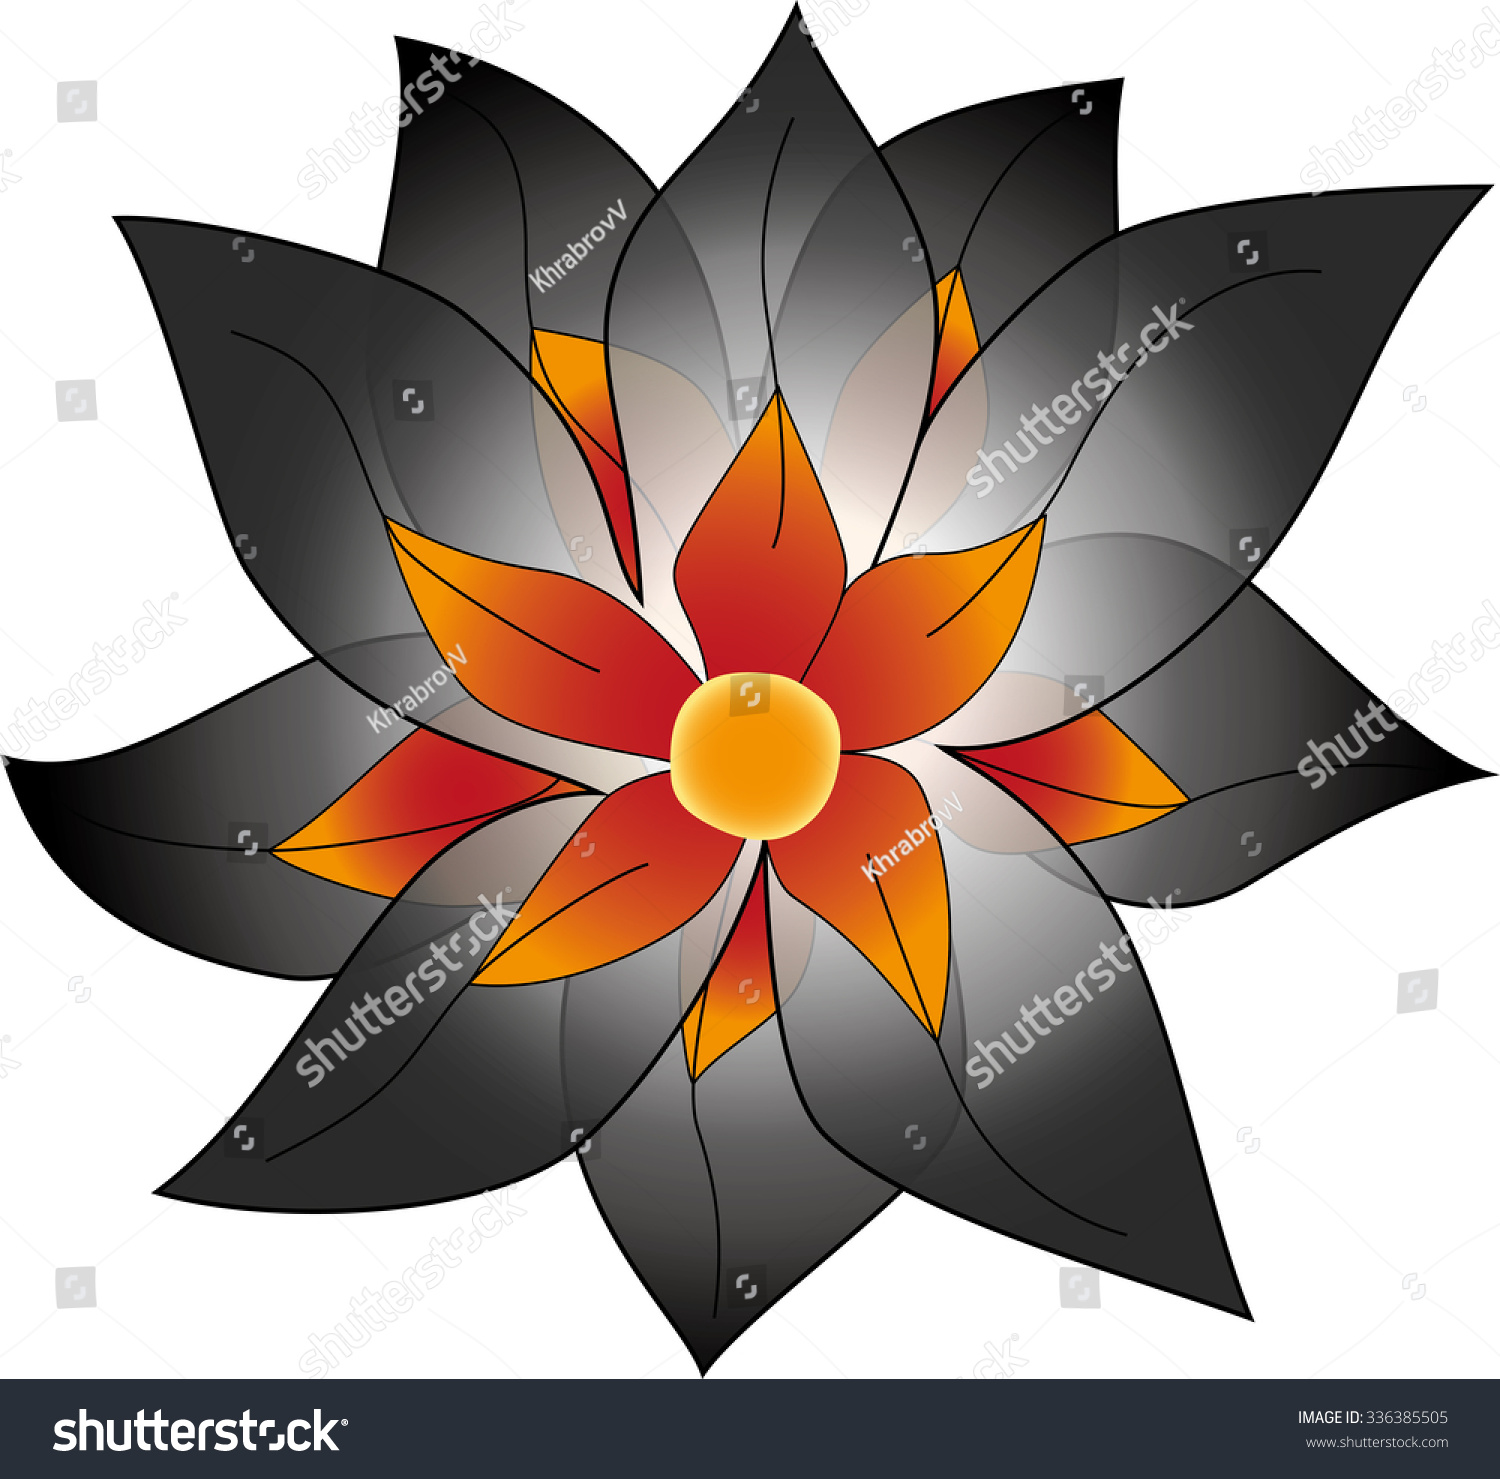 An Abstract Vector Flower In Anime Style - 336385505 : Shutterstock